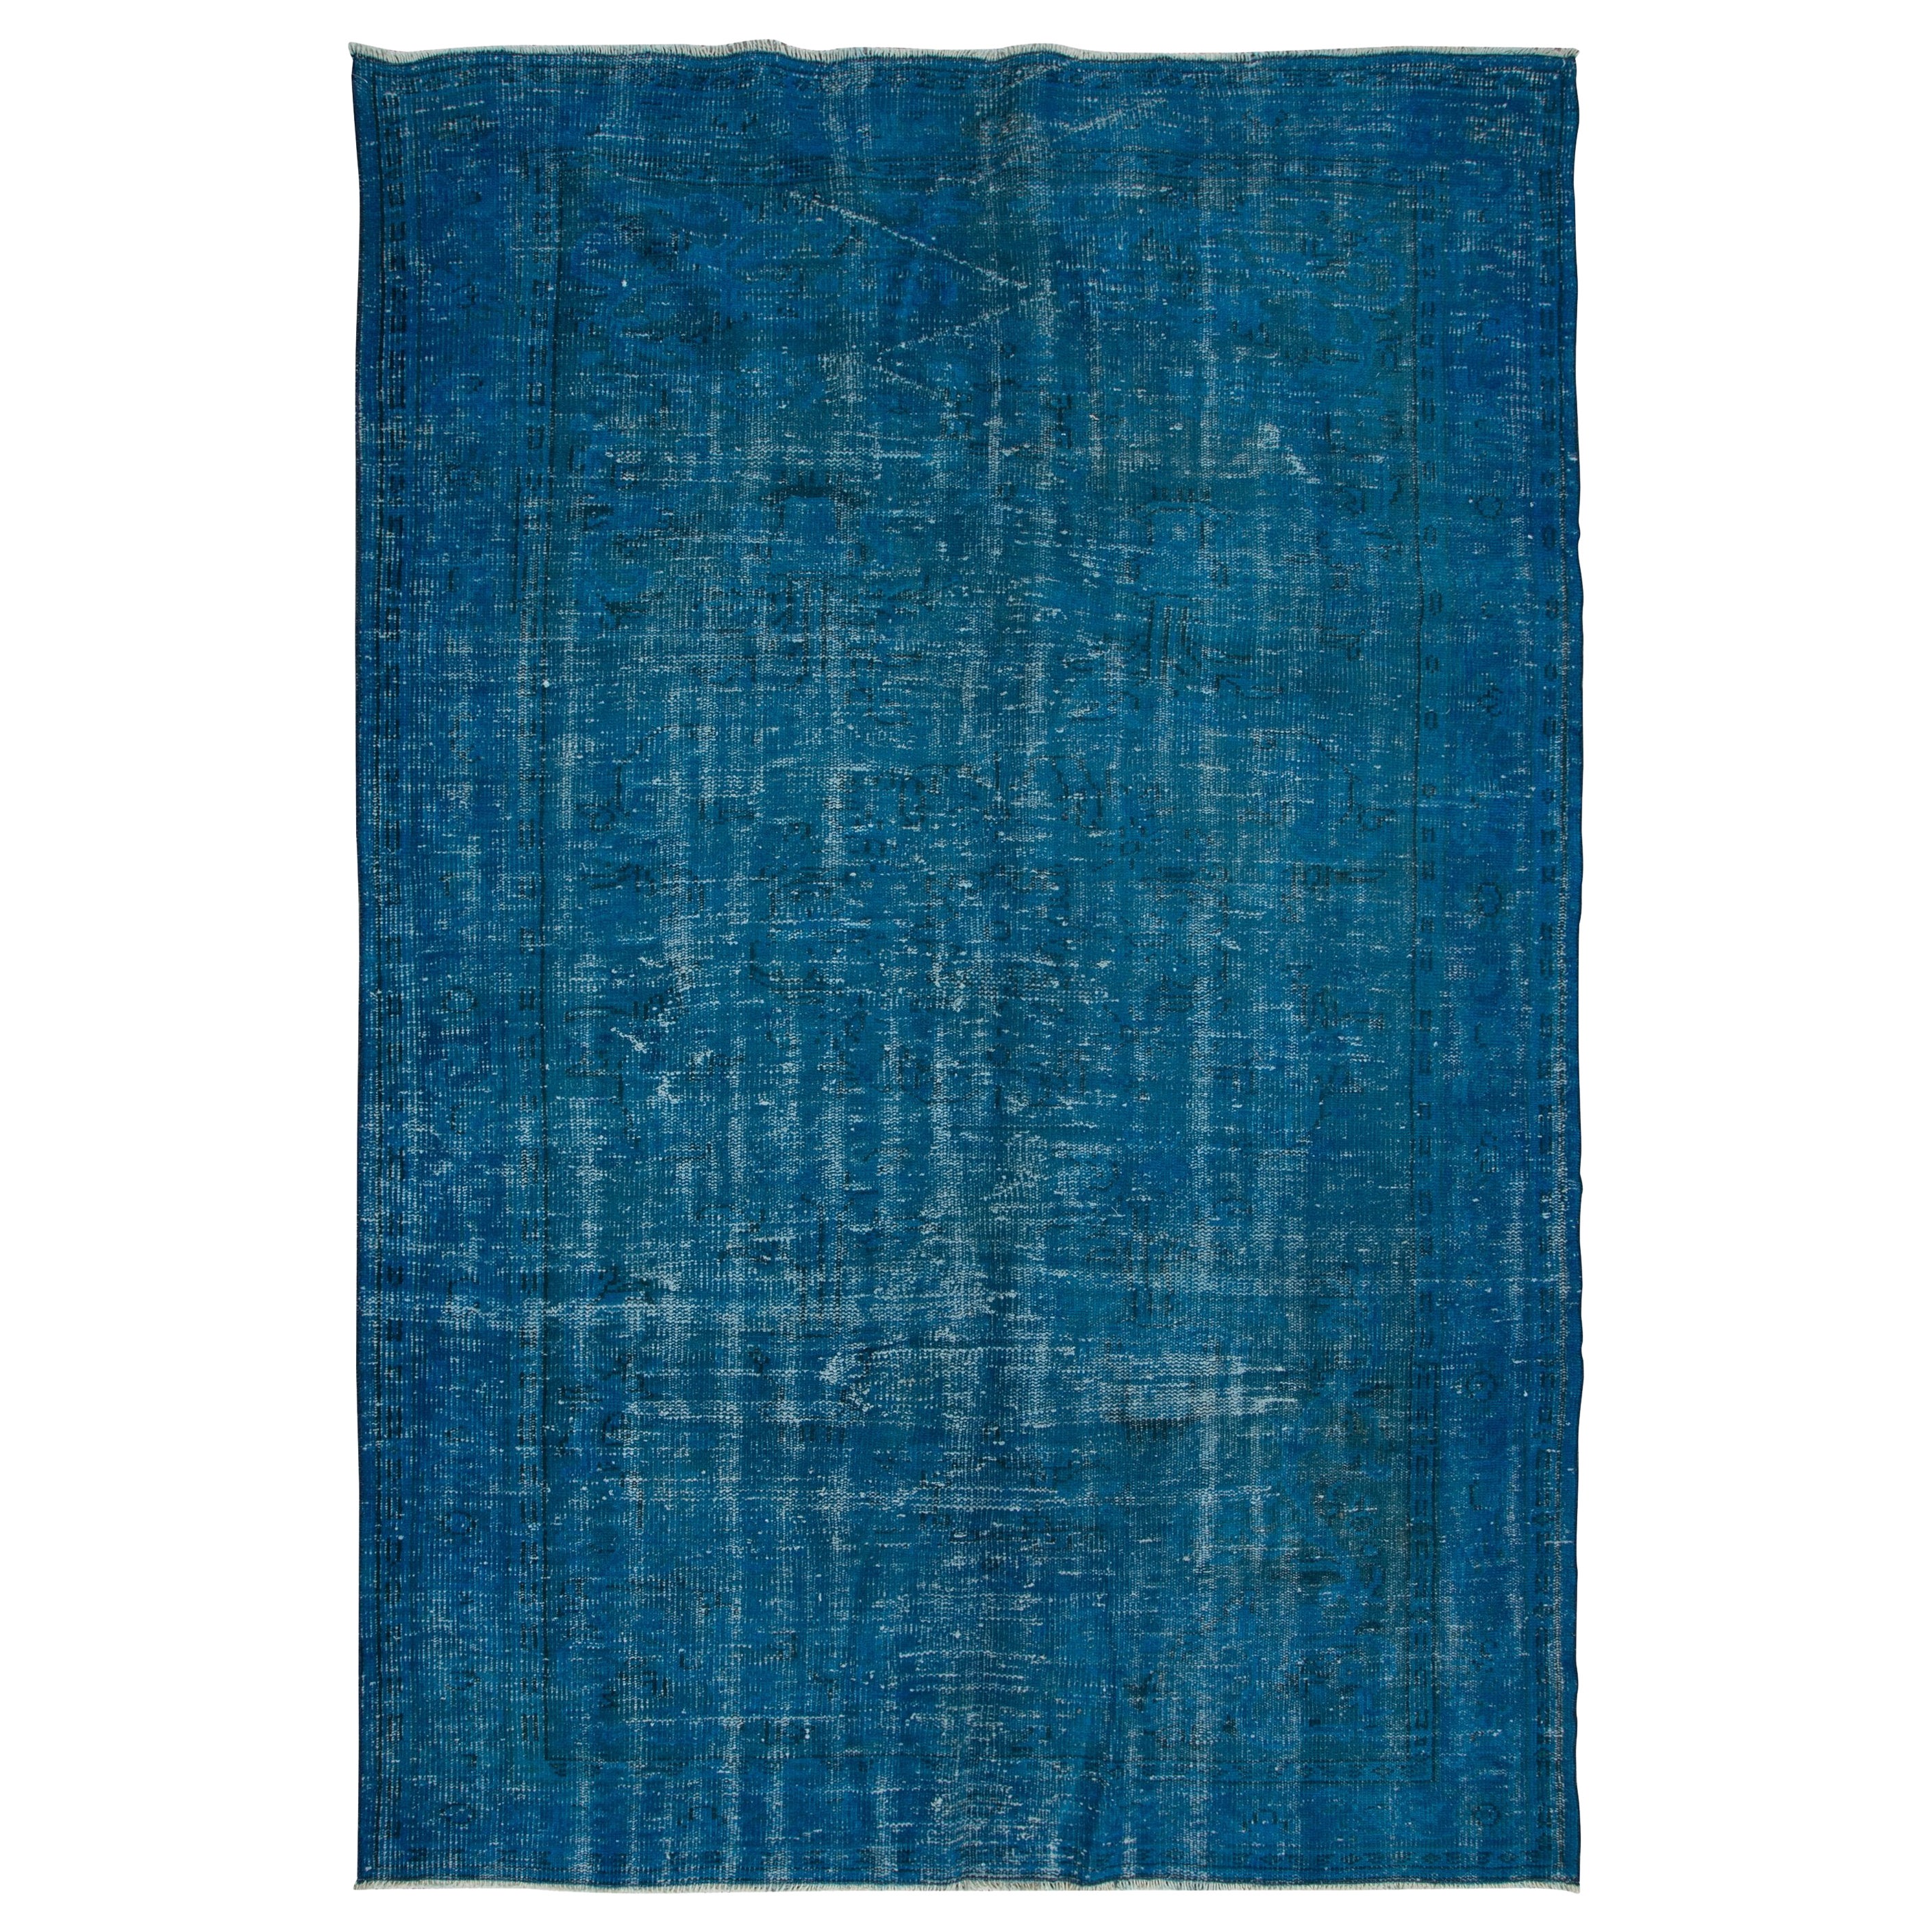 5.8x8.6 Ft Overdyed Blue Area Rug, Handmade in Turkey, Modern Upcycled Carpet For Sale